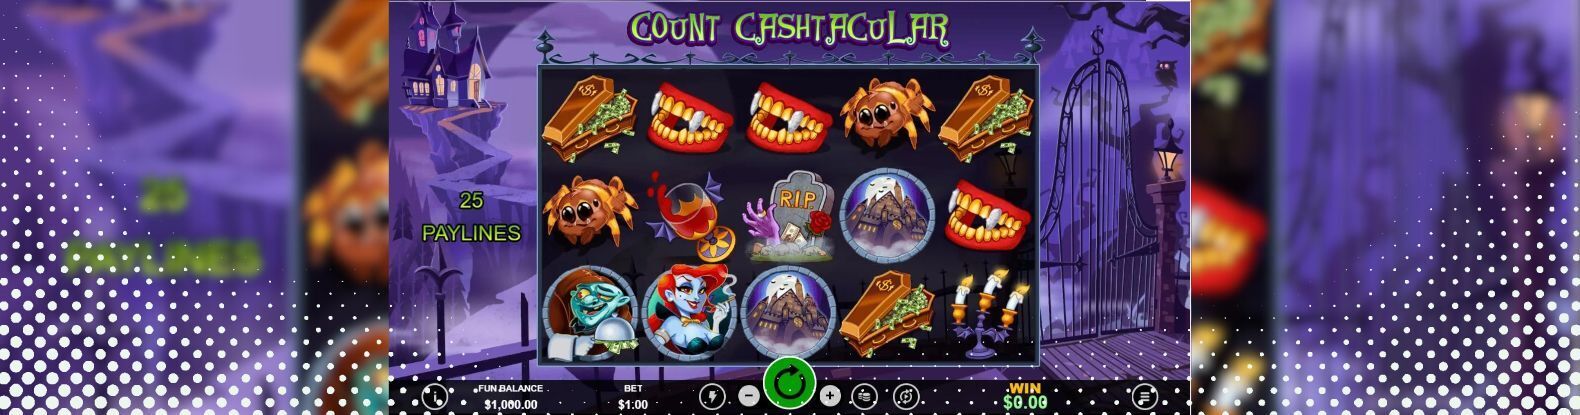 This is a pic of Count Cashtacular Pokies Games by RealTime Gaming